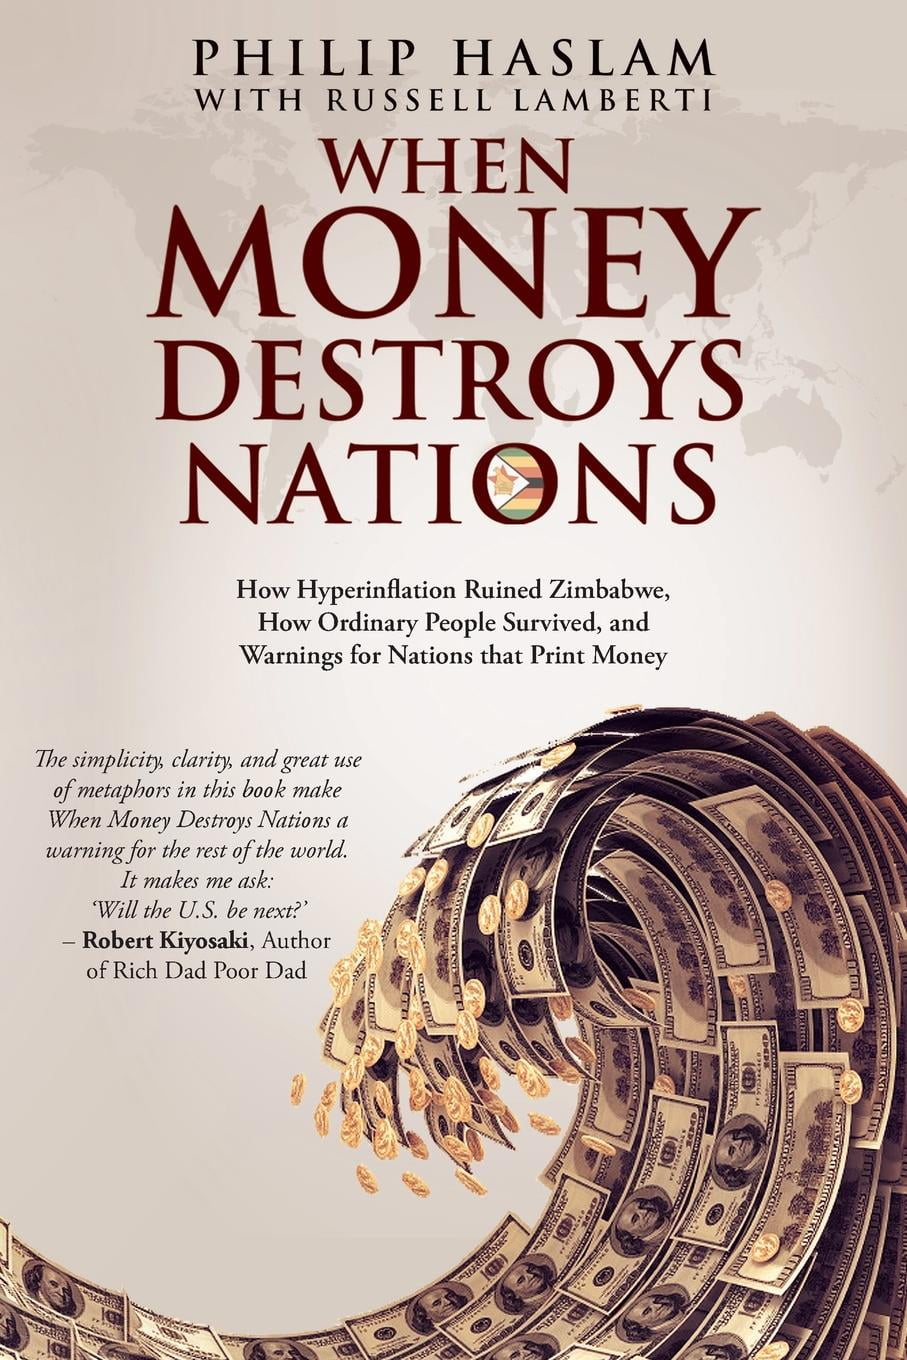 When-Money-Destroys-Nations-How-Hyperinflation-Ruined-Zimbabwe-How-Ordinary-People-Survived-and-Warnings-for-Nations-that-Print-Money